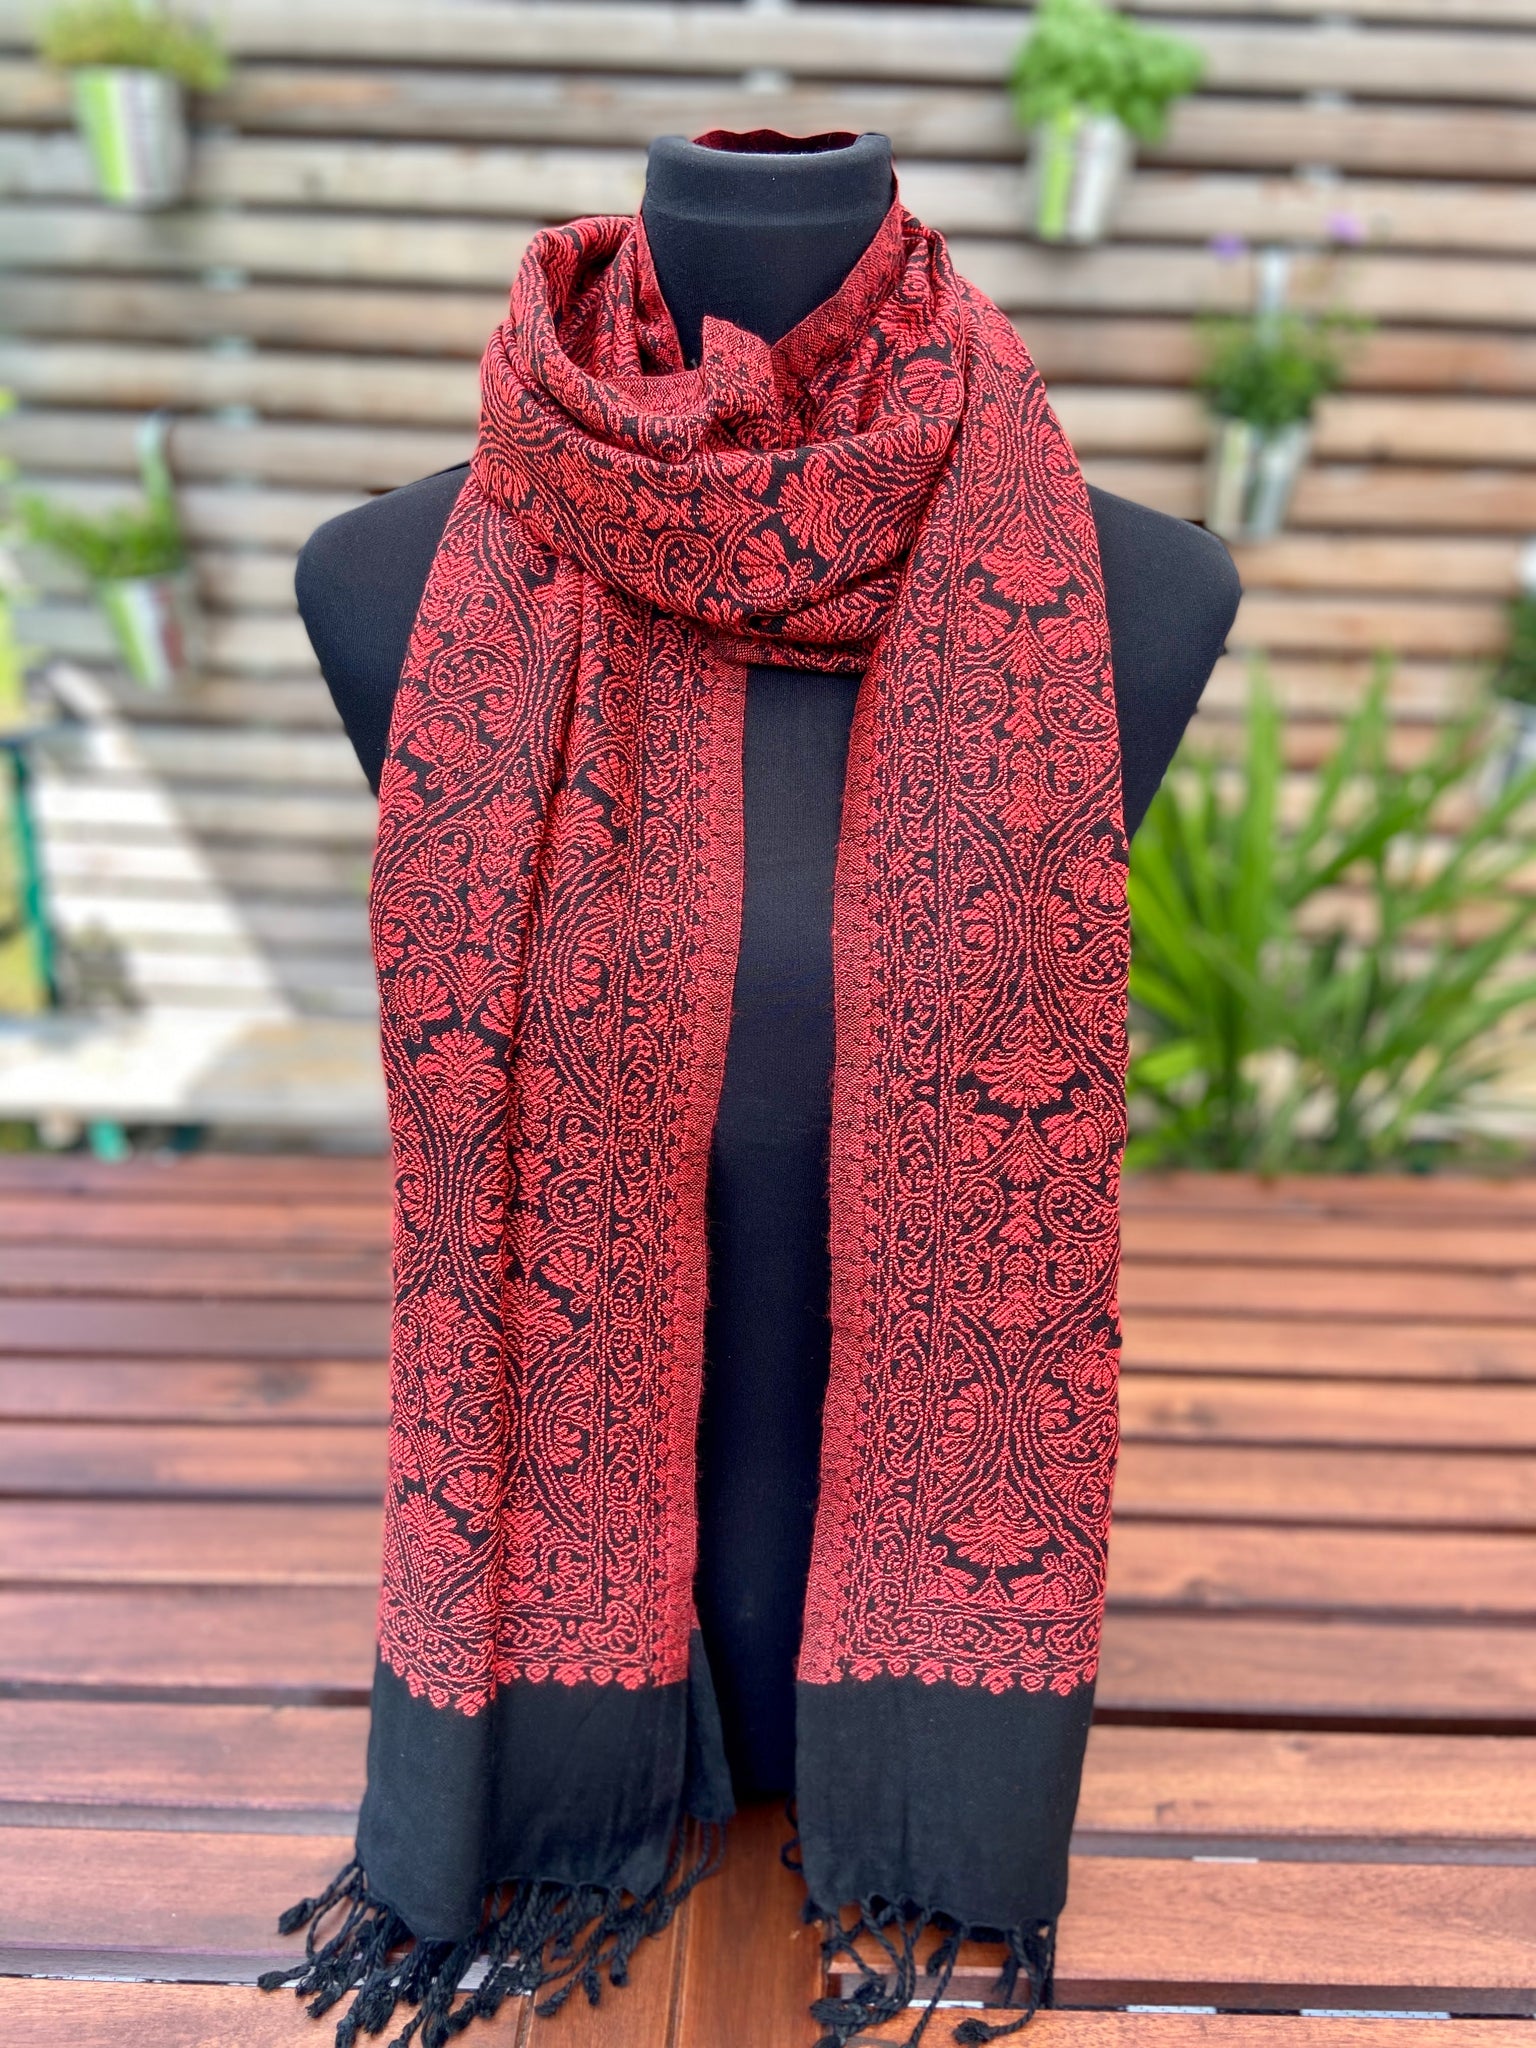 Reversible / two-sided soft shawl